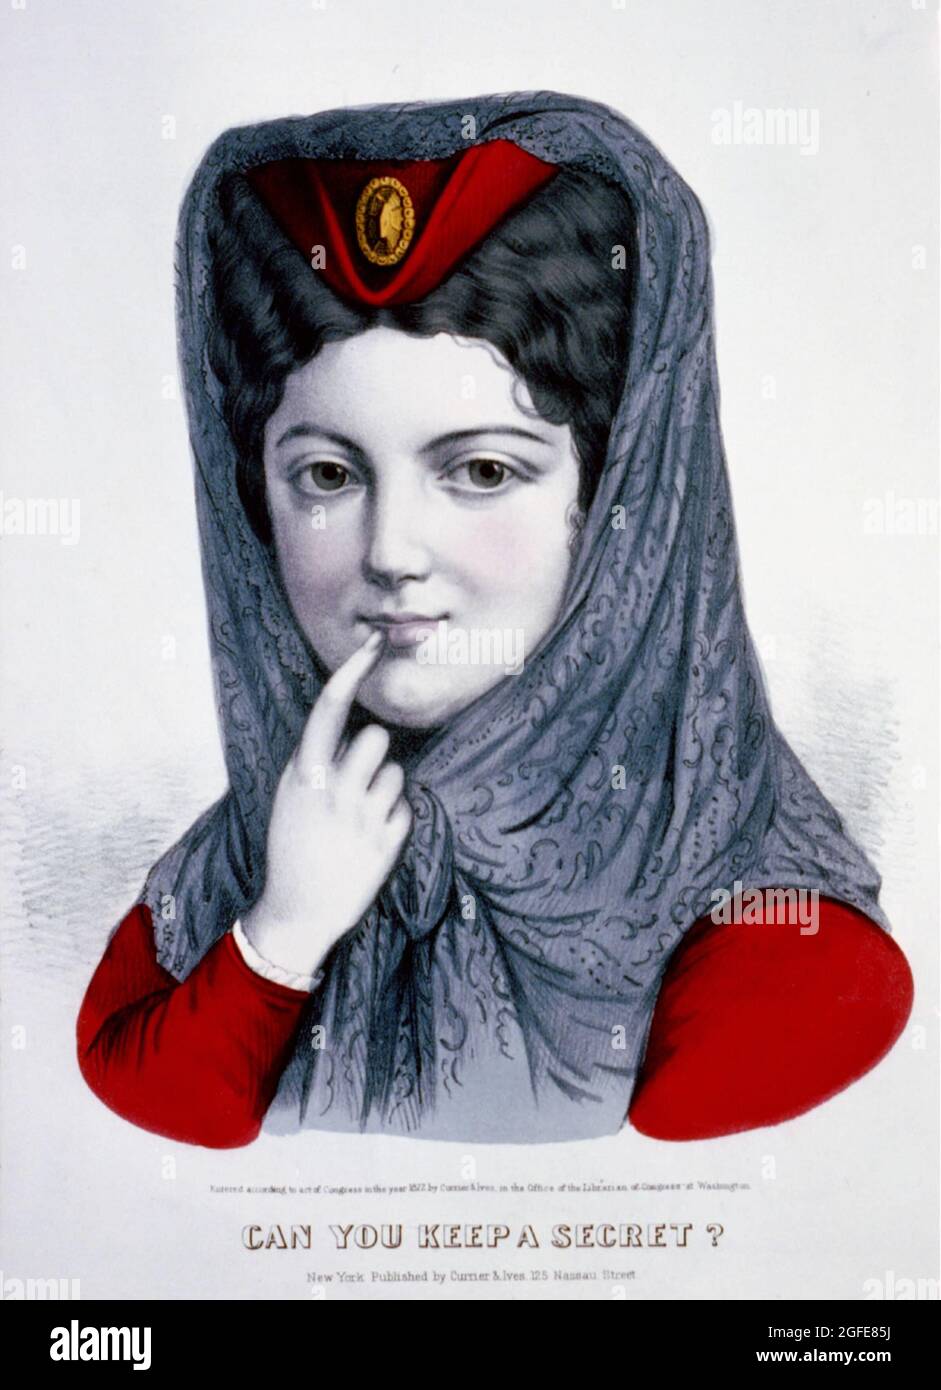 Can You Keep a Secret - Poster - 1872 - Attractive woman holds finger to lips Stock Photo